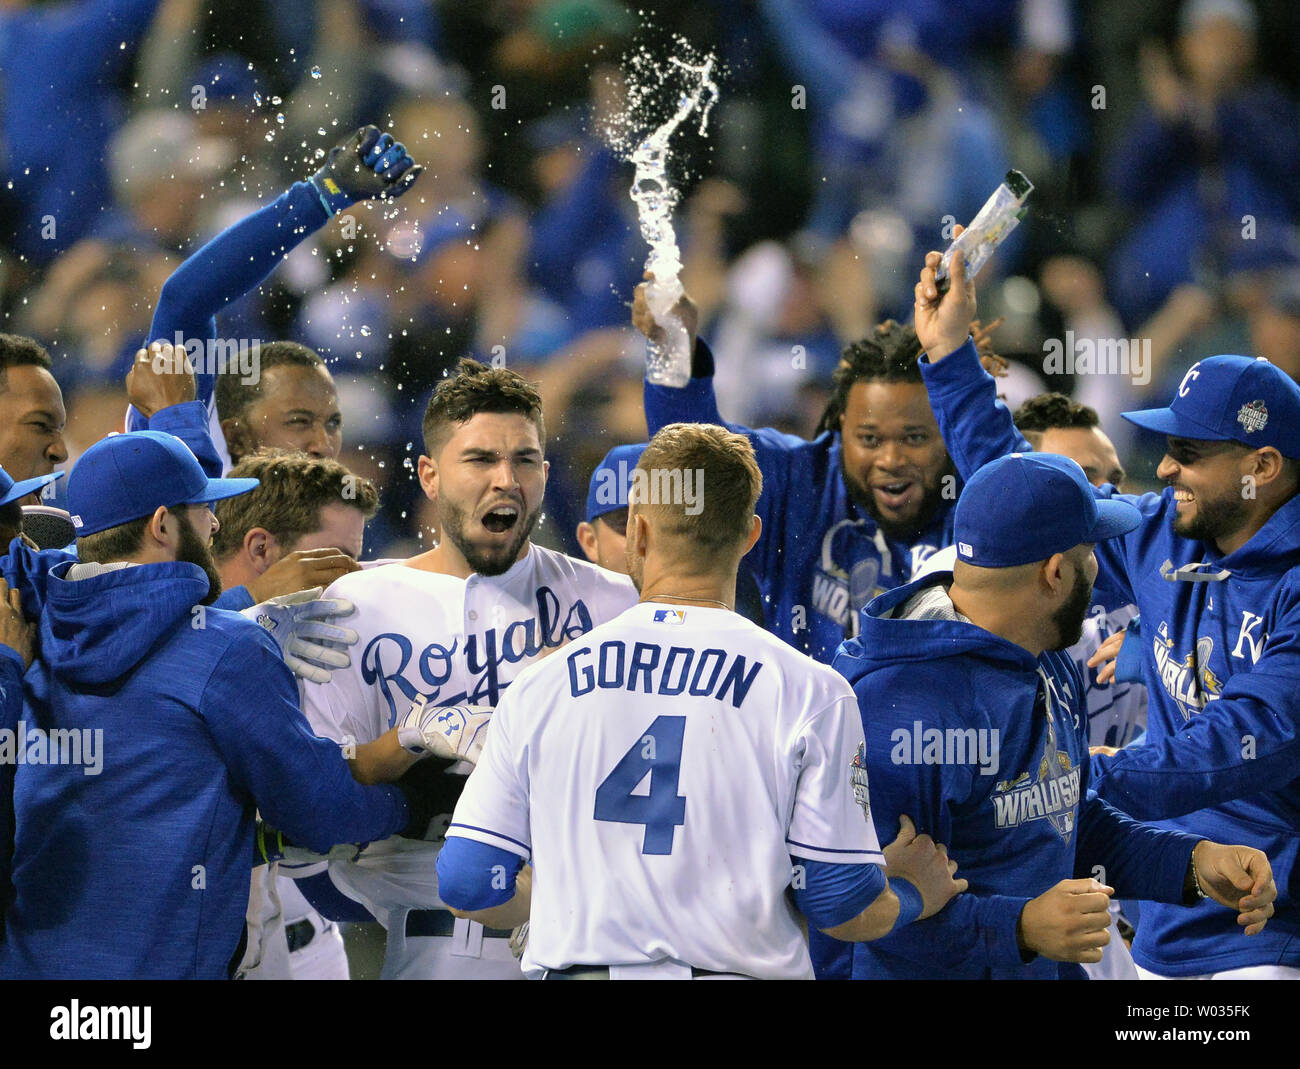 Royals Beat Mets 5-4 in 14th Inning of First World Series Game